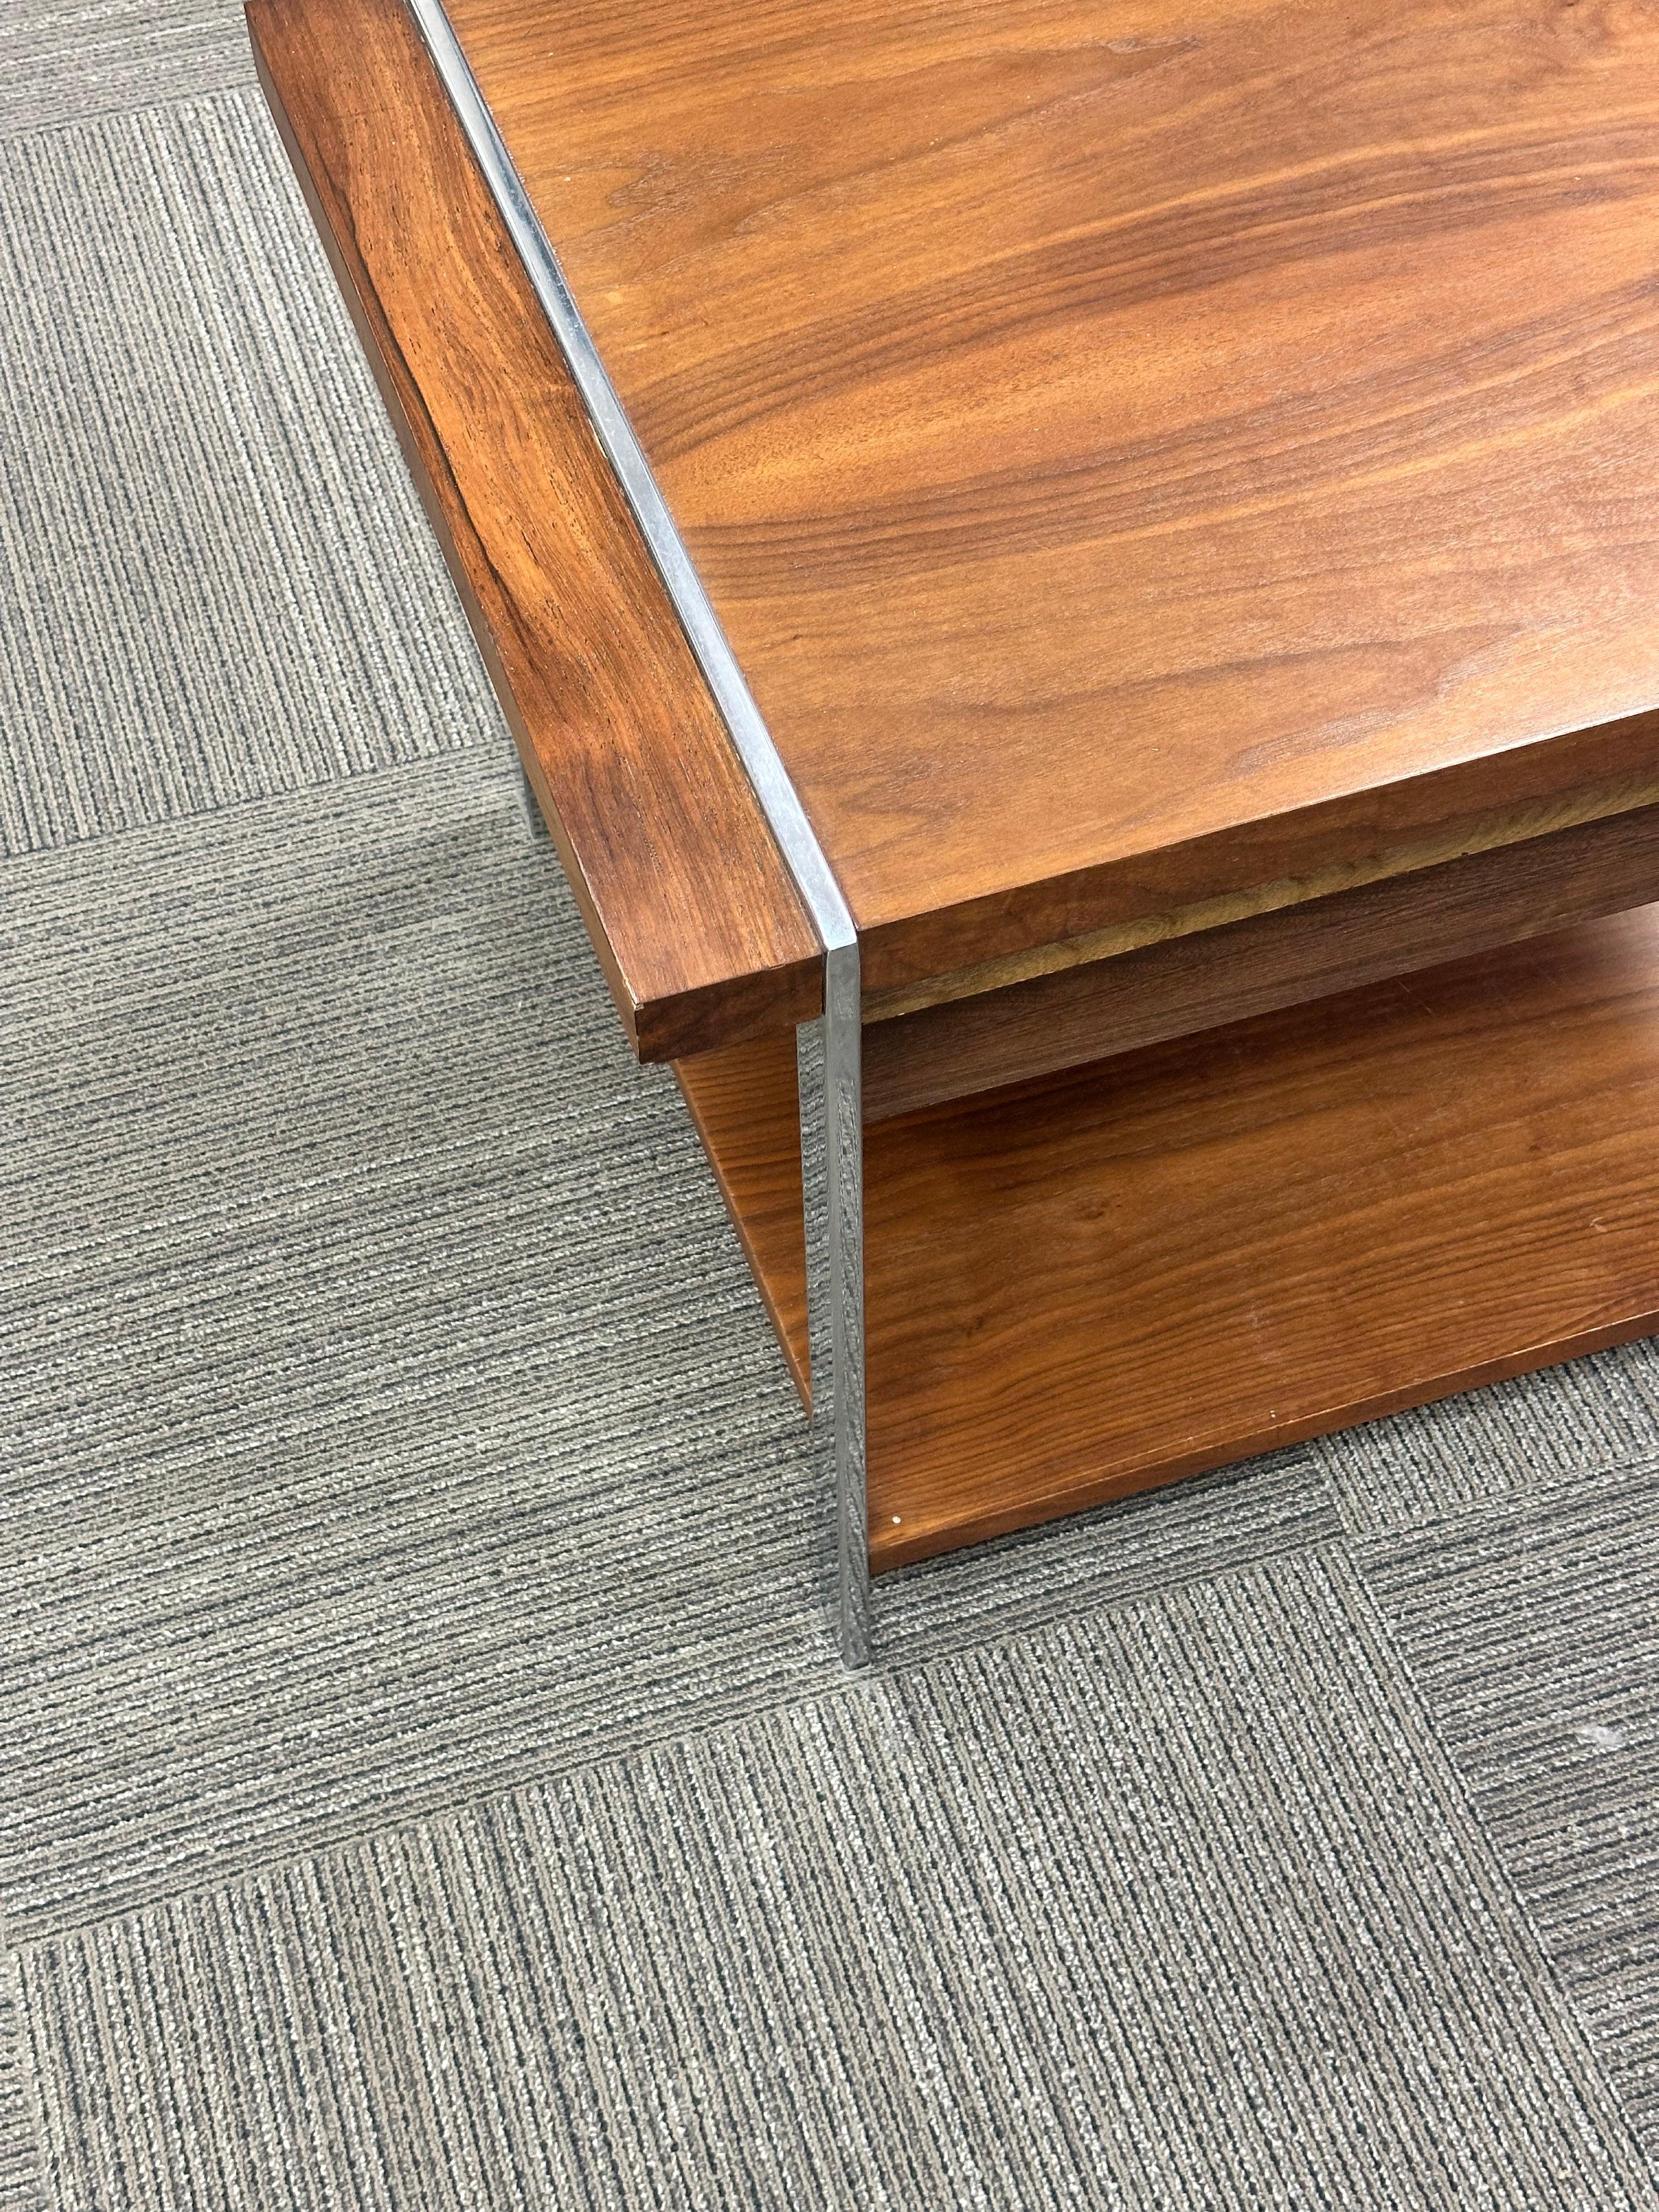 Lane Furniture Walnut, Rosewood, and Chrome End Table In Good Condition For Sale In Skokie, IL